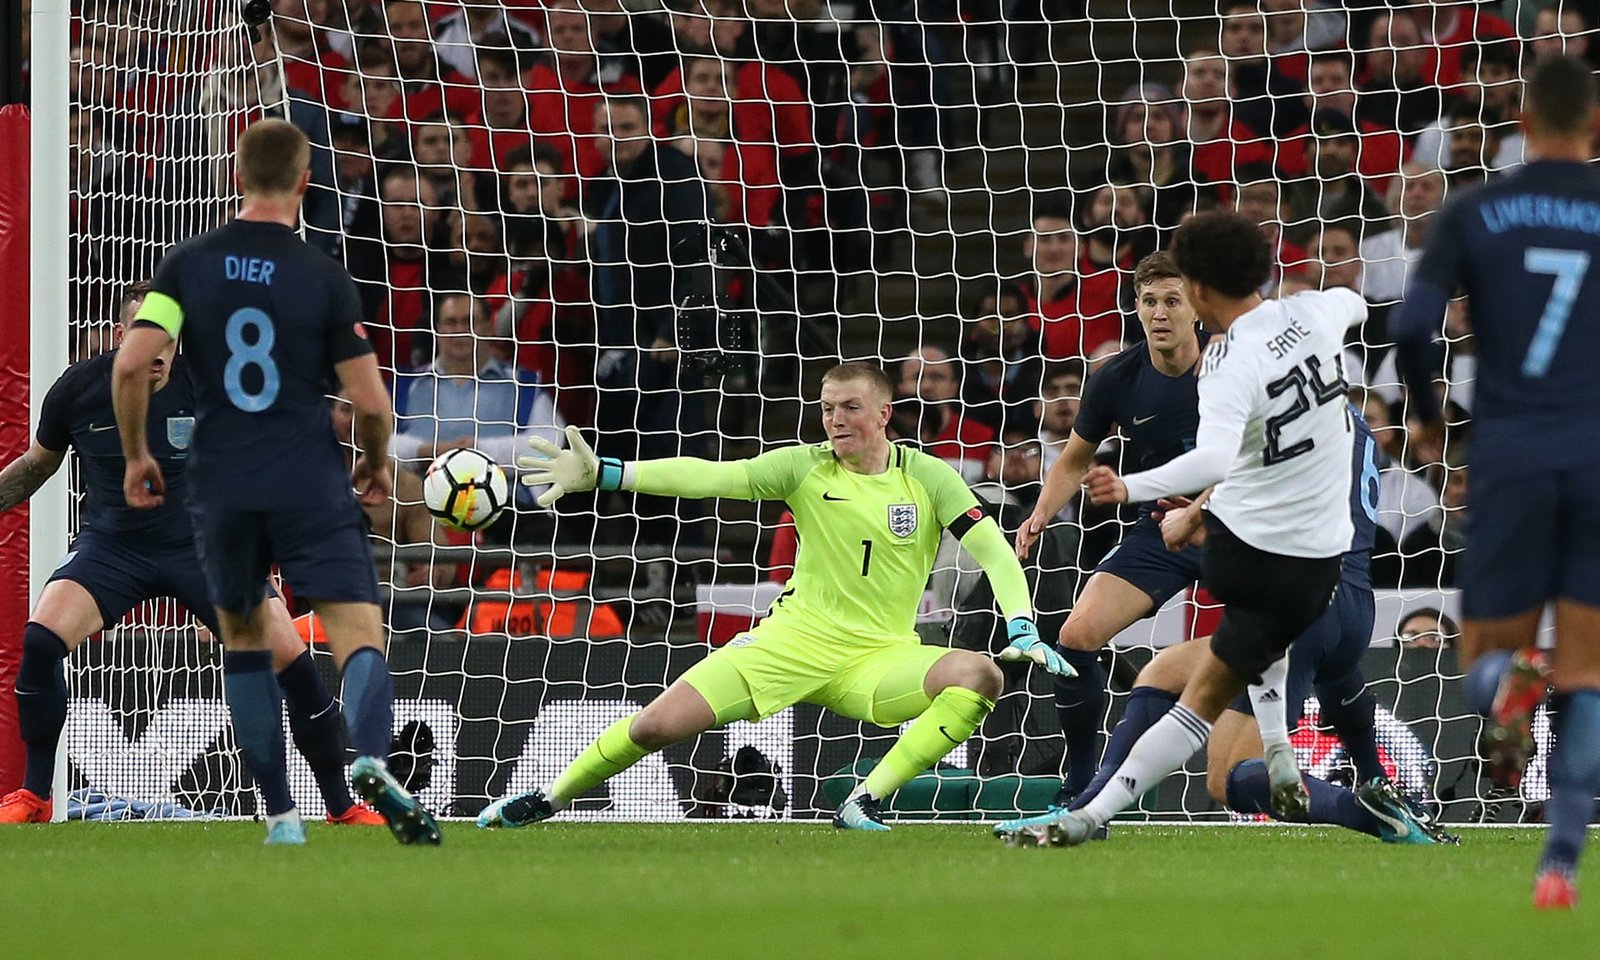 Pickford shines for England in goalless draw with Germany